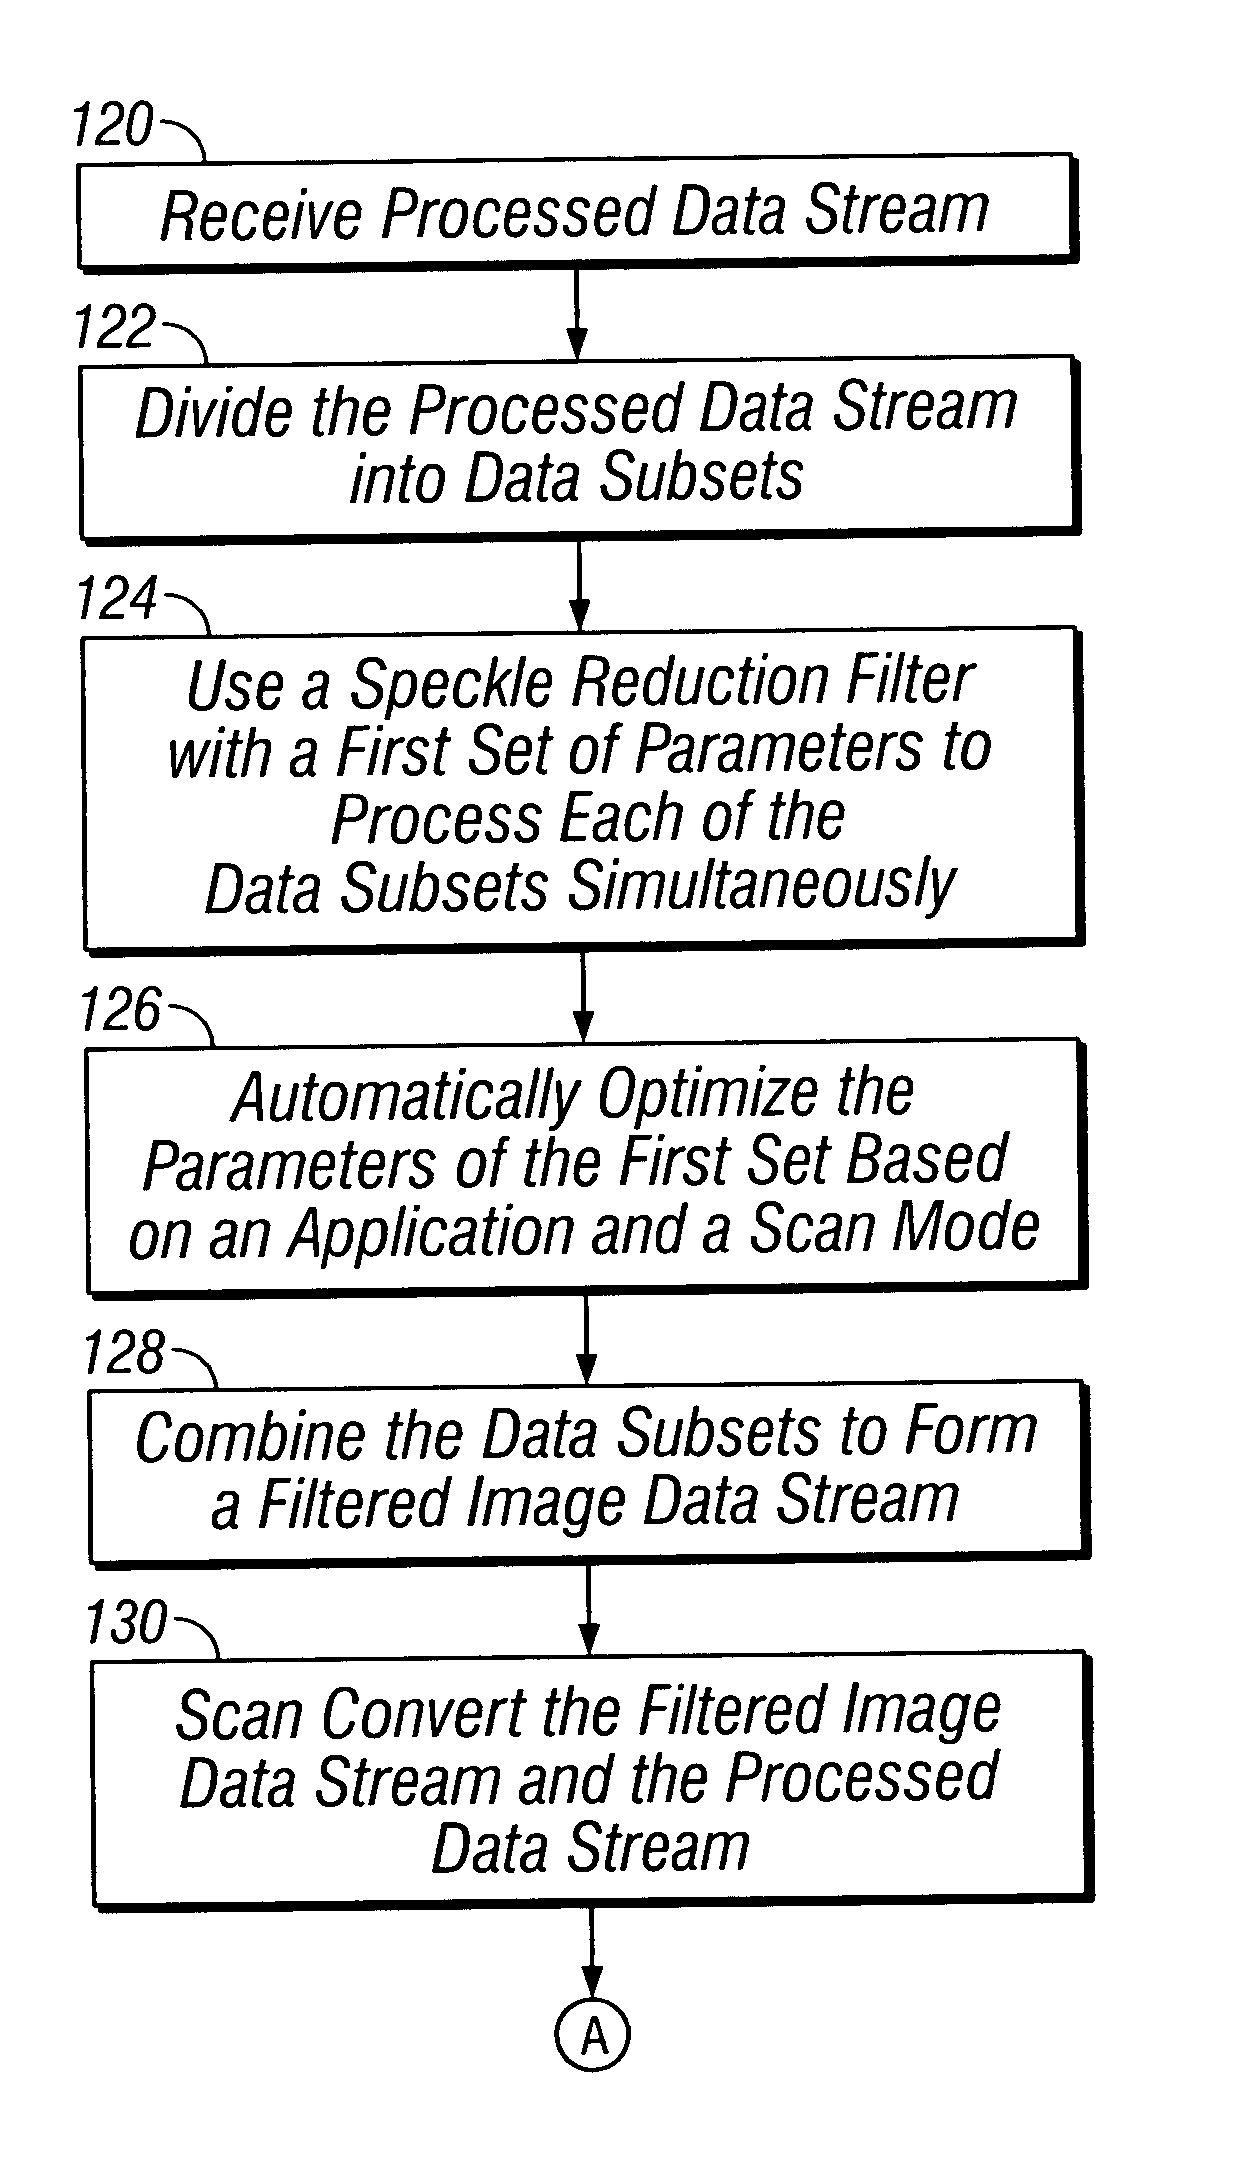 Systems and methods for implementing a speckle reduction filter